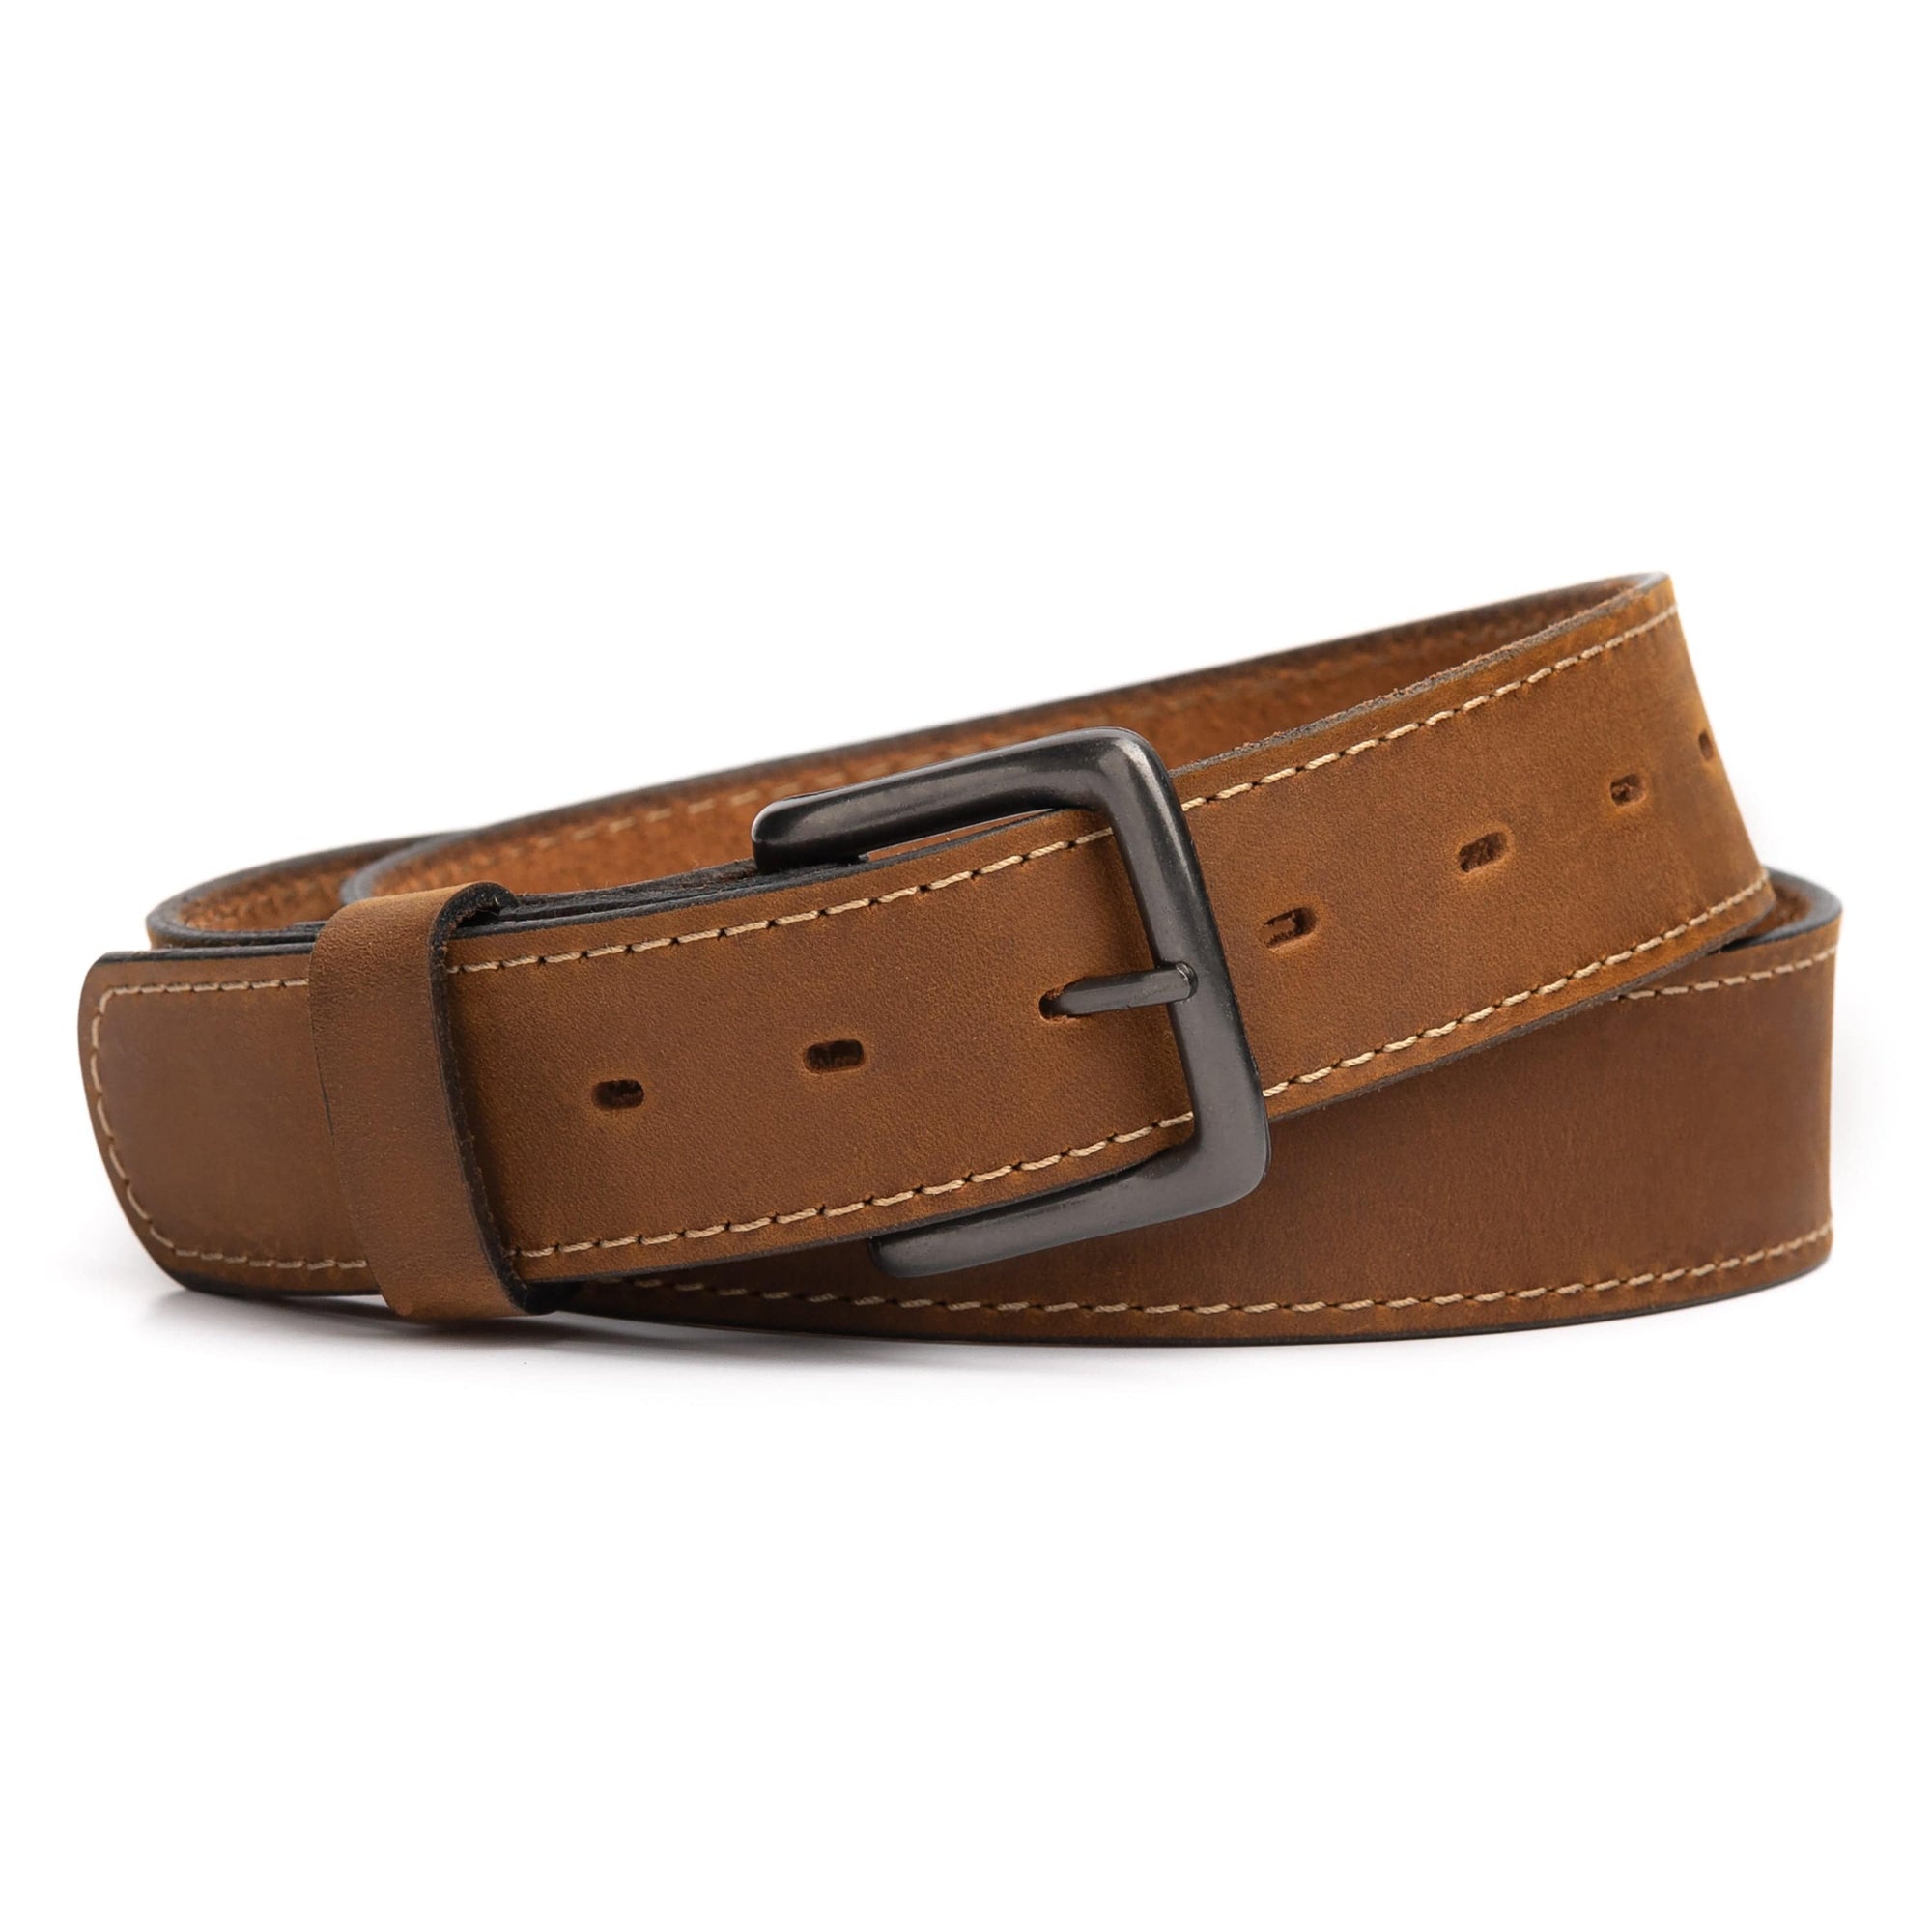 The Outrider Leather Belt